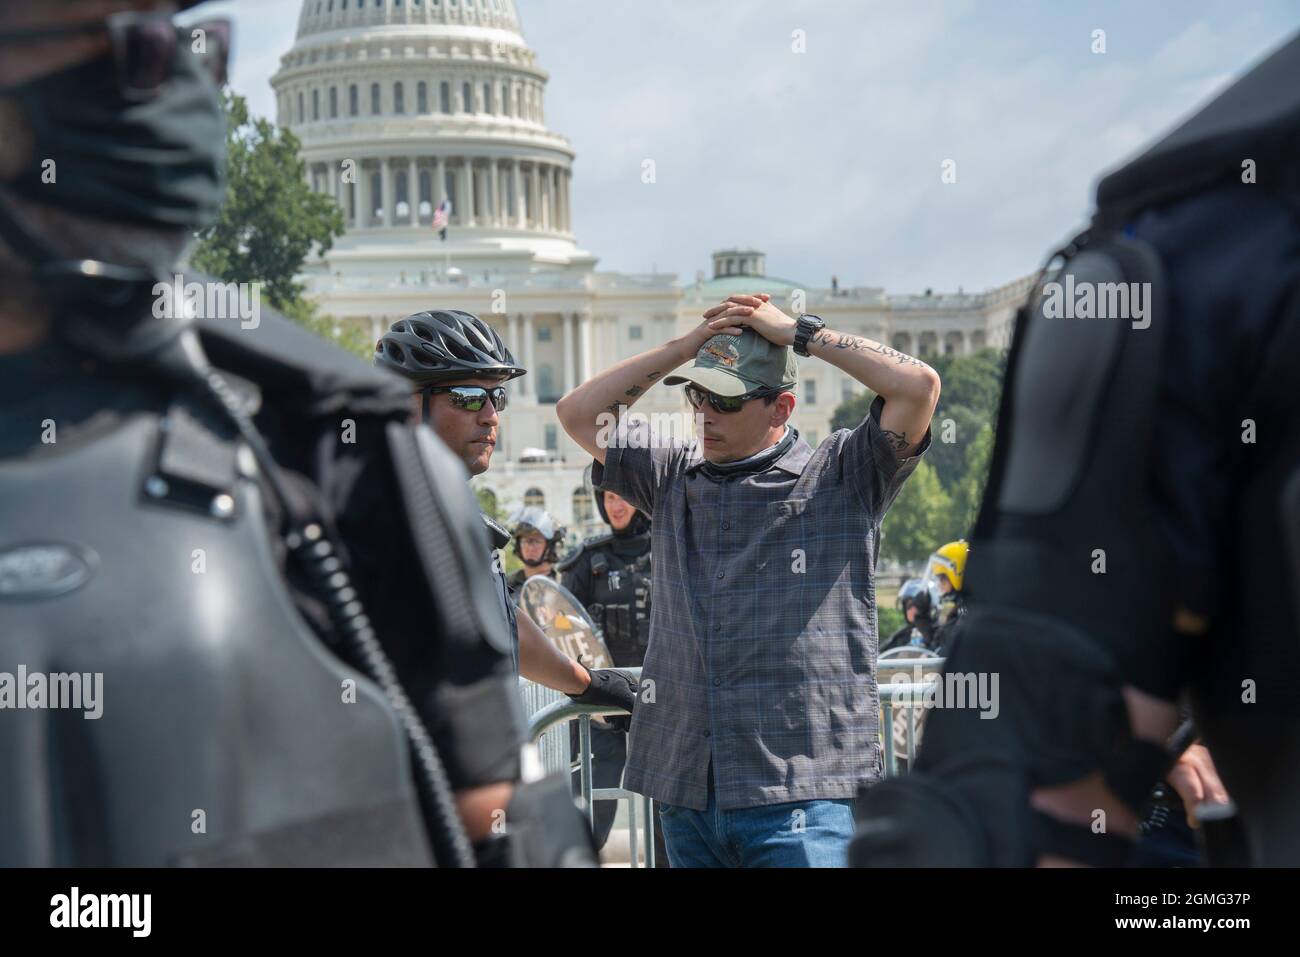 Washington DC, September 18, 2021, USA: An unidentified man was arrested by US Capitol police as the Justice for J6 rally was ending.  The cause of th Stock Photo